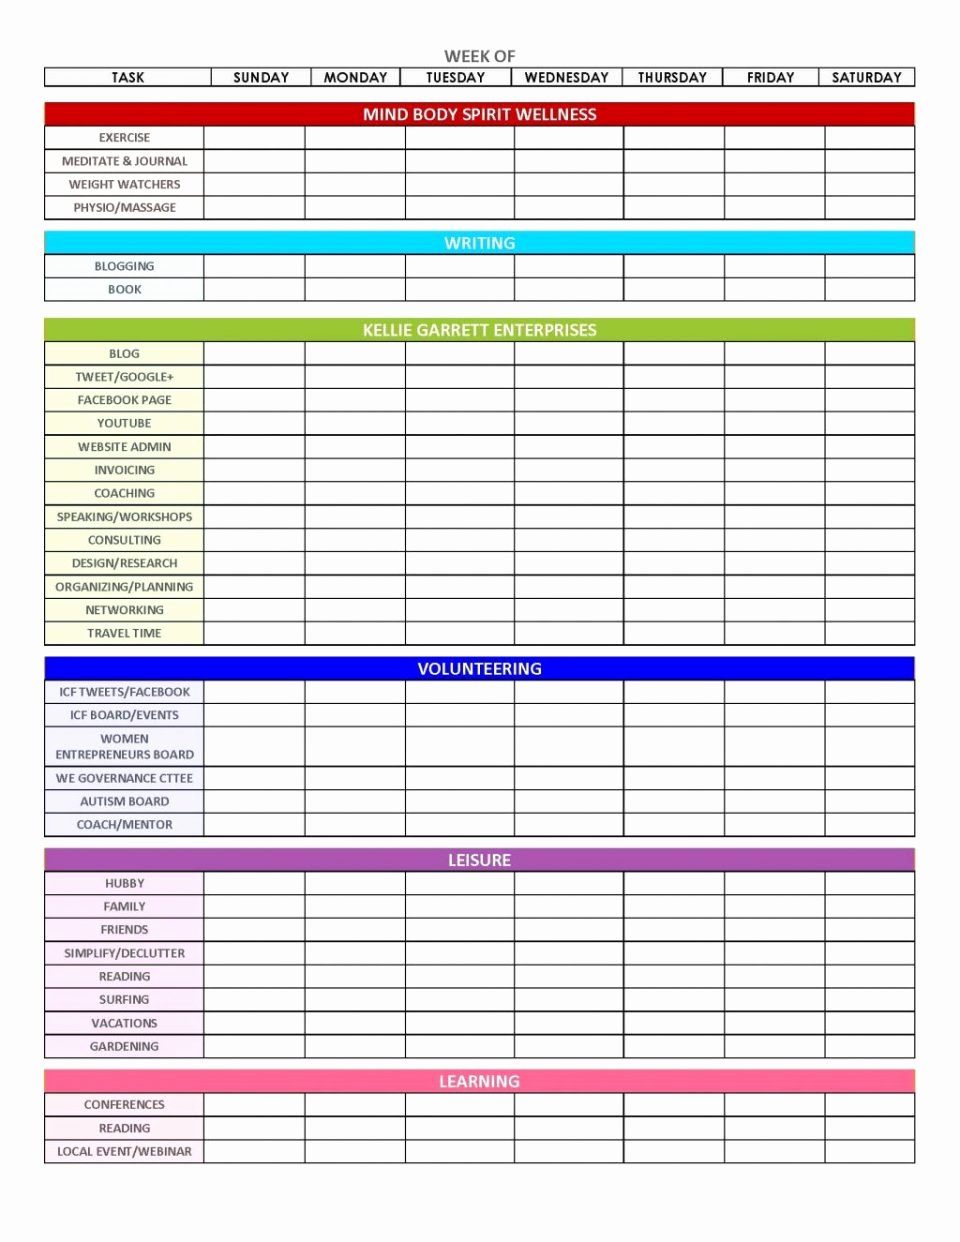 Employee Time Tracking Template Awesome Sheet Daily Time Tracking Spreadsheet Excel Template